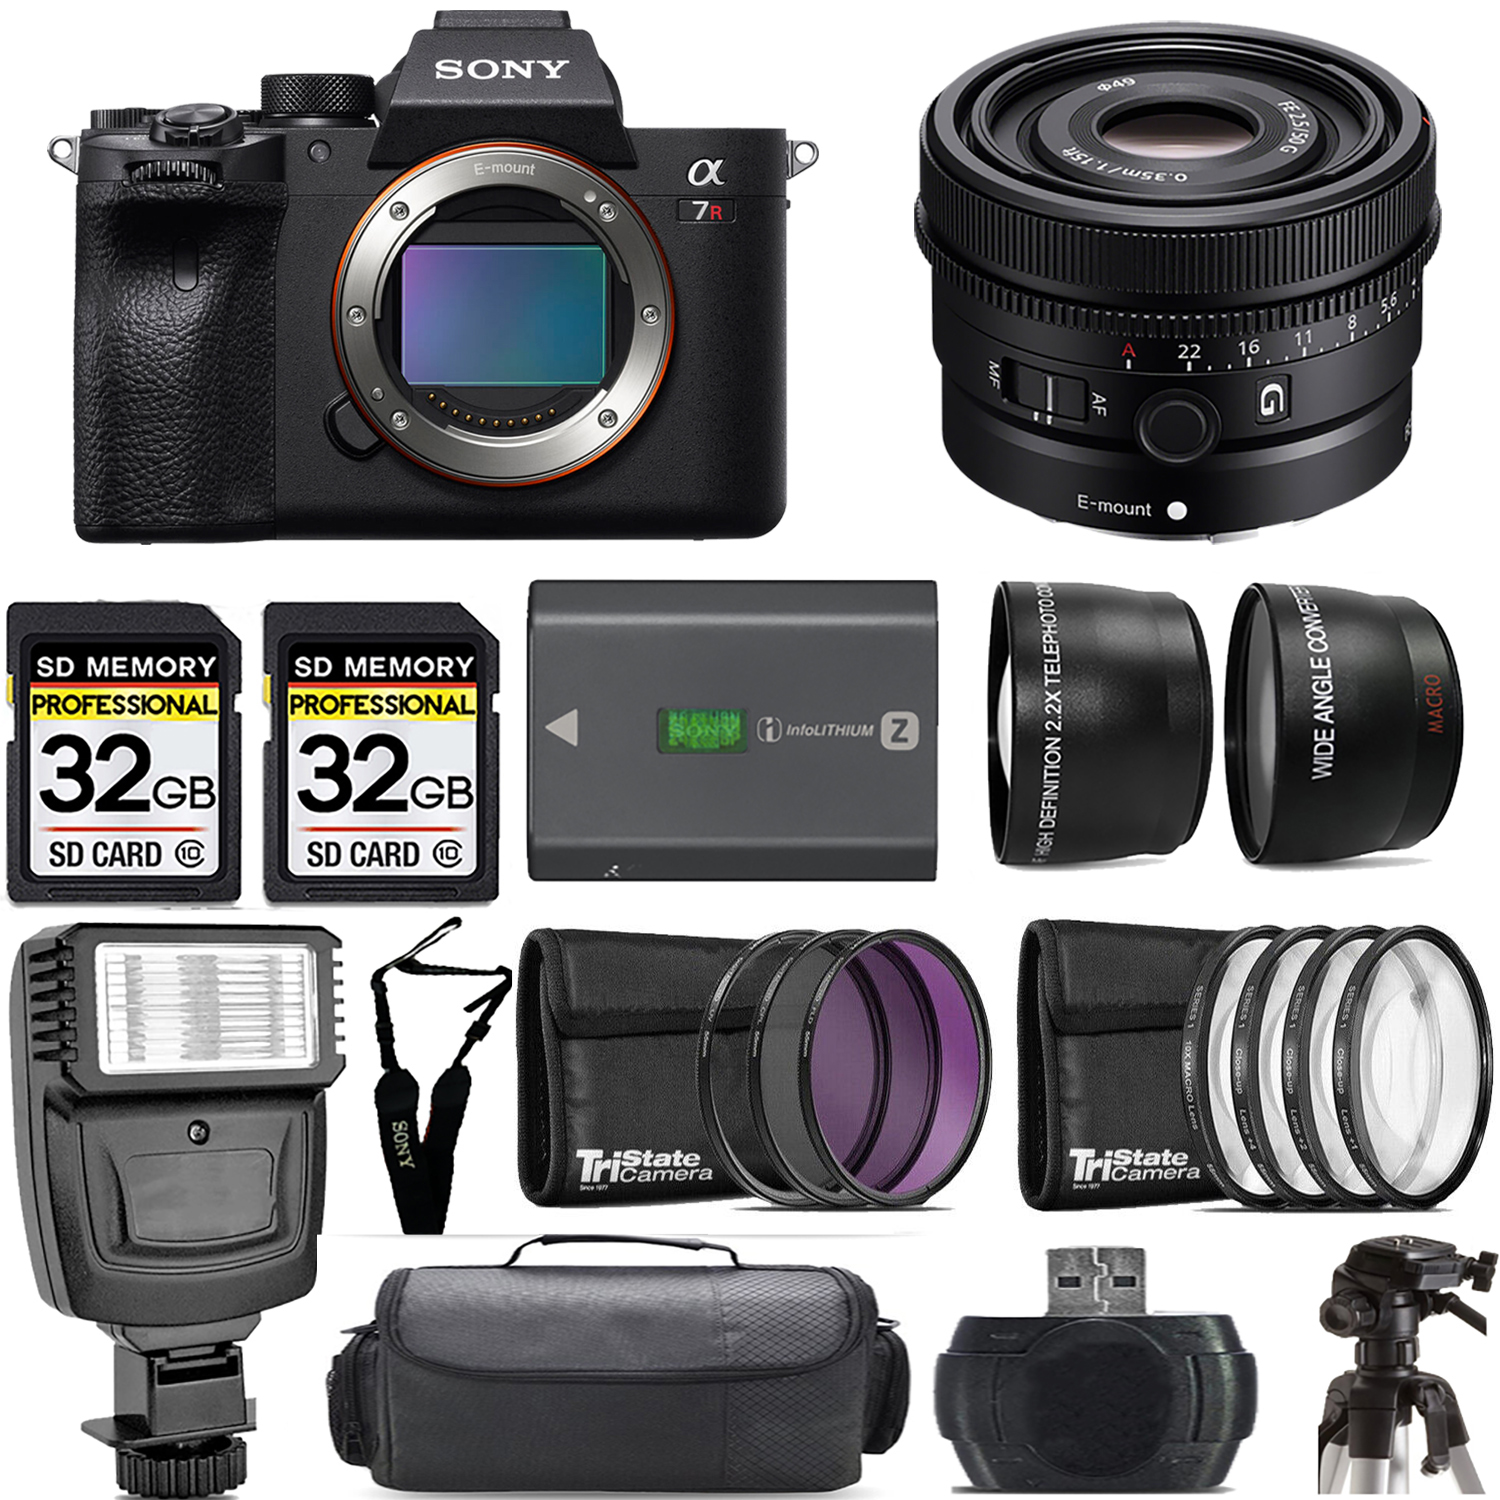 a7R IVA Mirrorless Camera + 50mm Lens + Flash + Extra Battery Bundle *FREE SHIPPING*